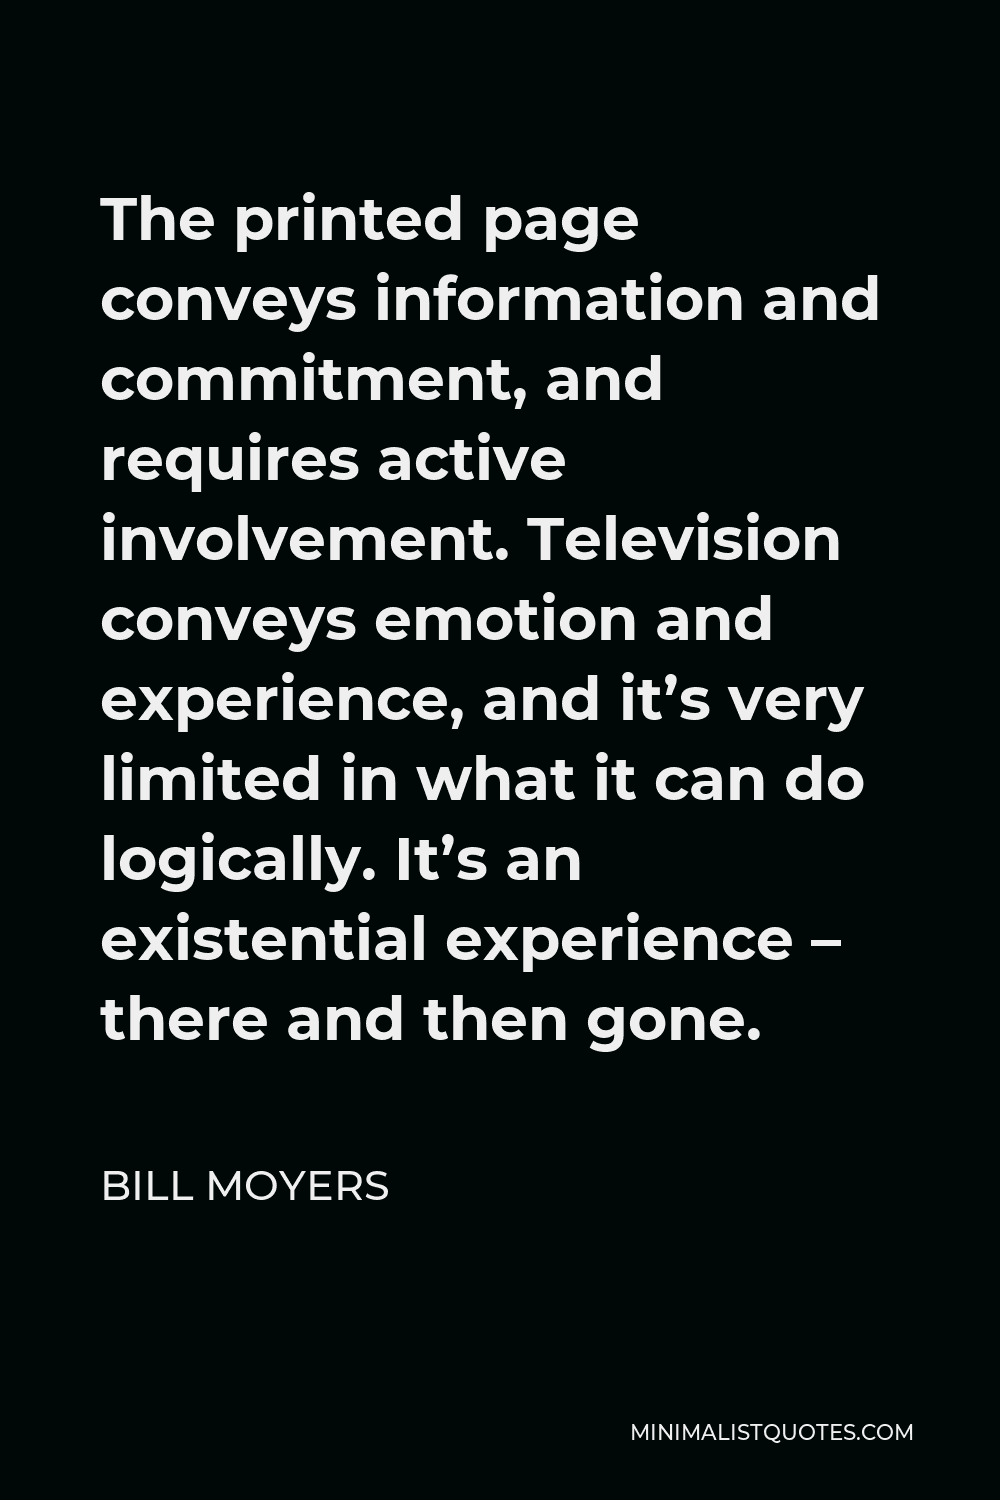 Bill Moyers Quote - The printed page conveys information and commitment, and requires active involvement. Television conveys emotion and experience, and it’s very limited in what it can do logically. It’s an existential experience – there and then gone.